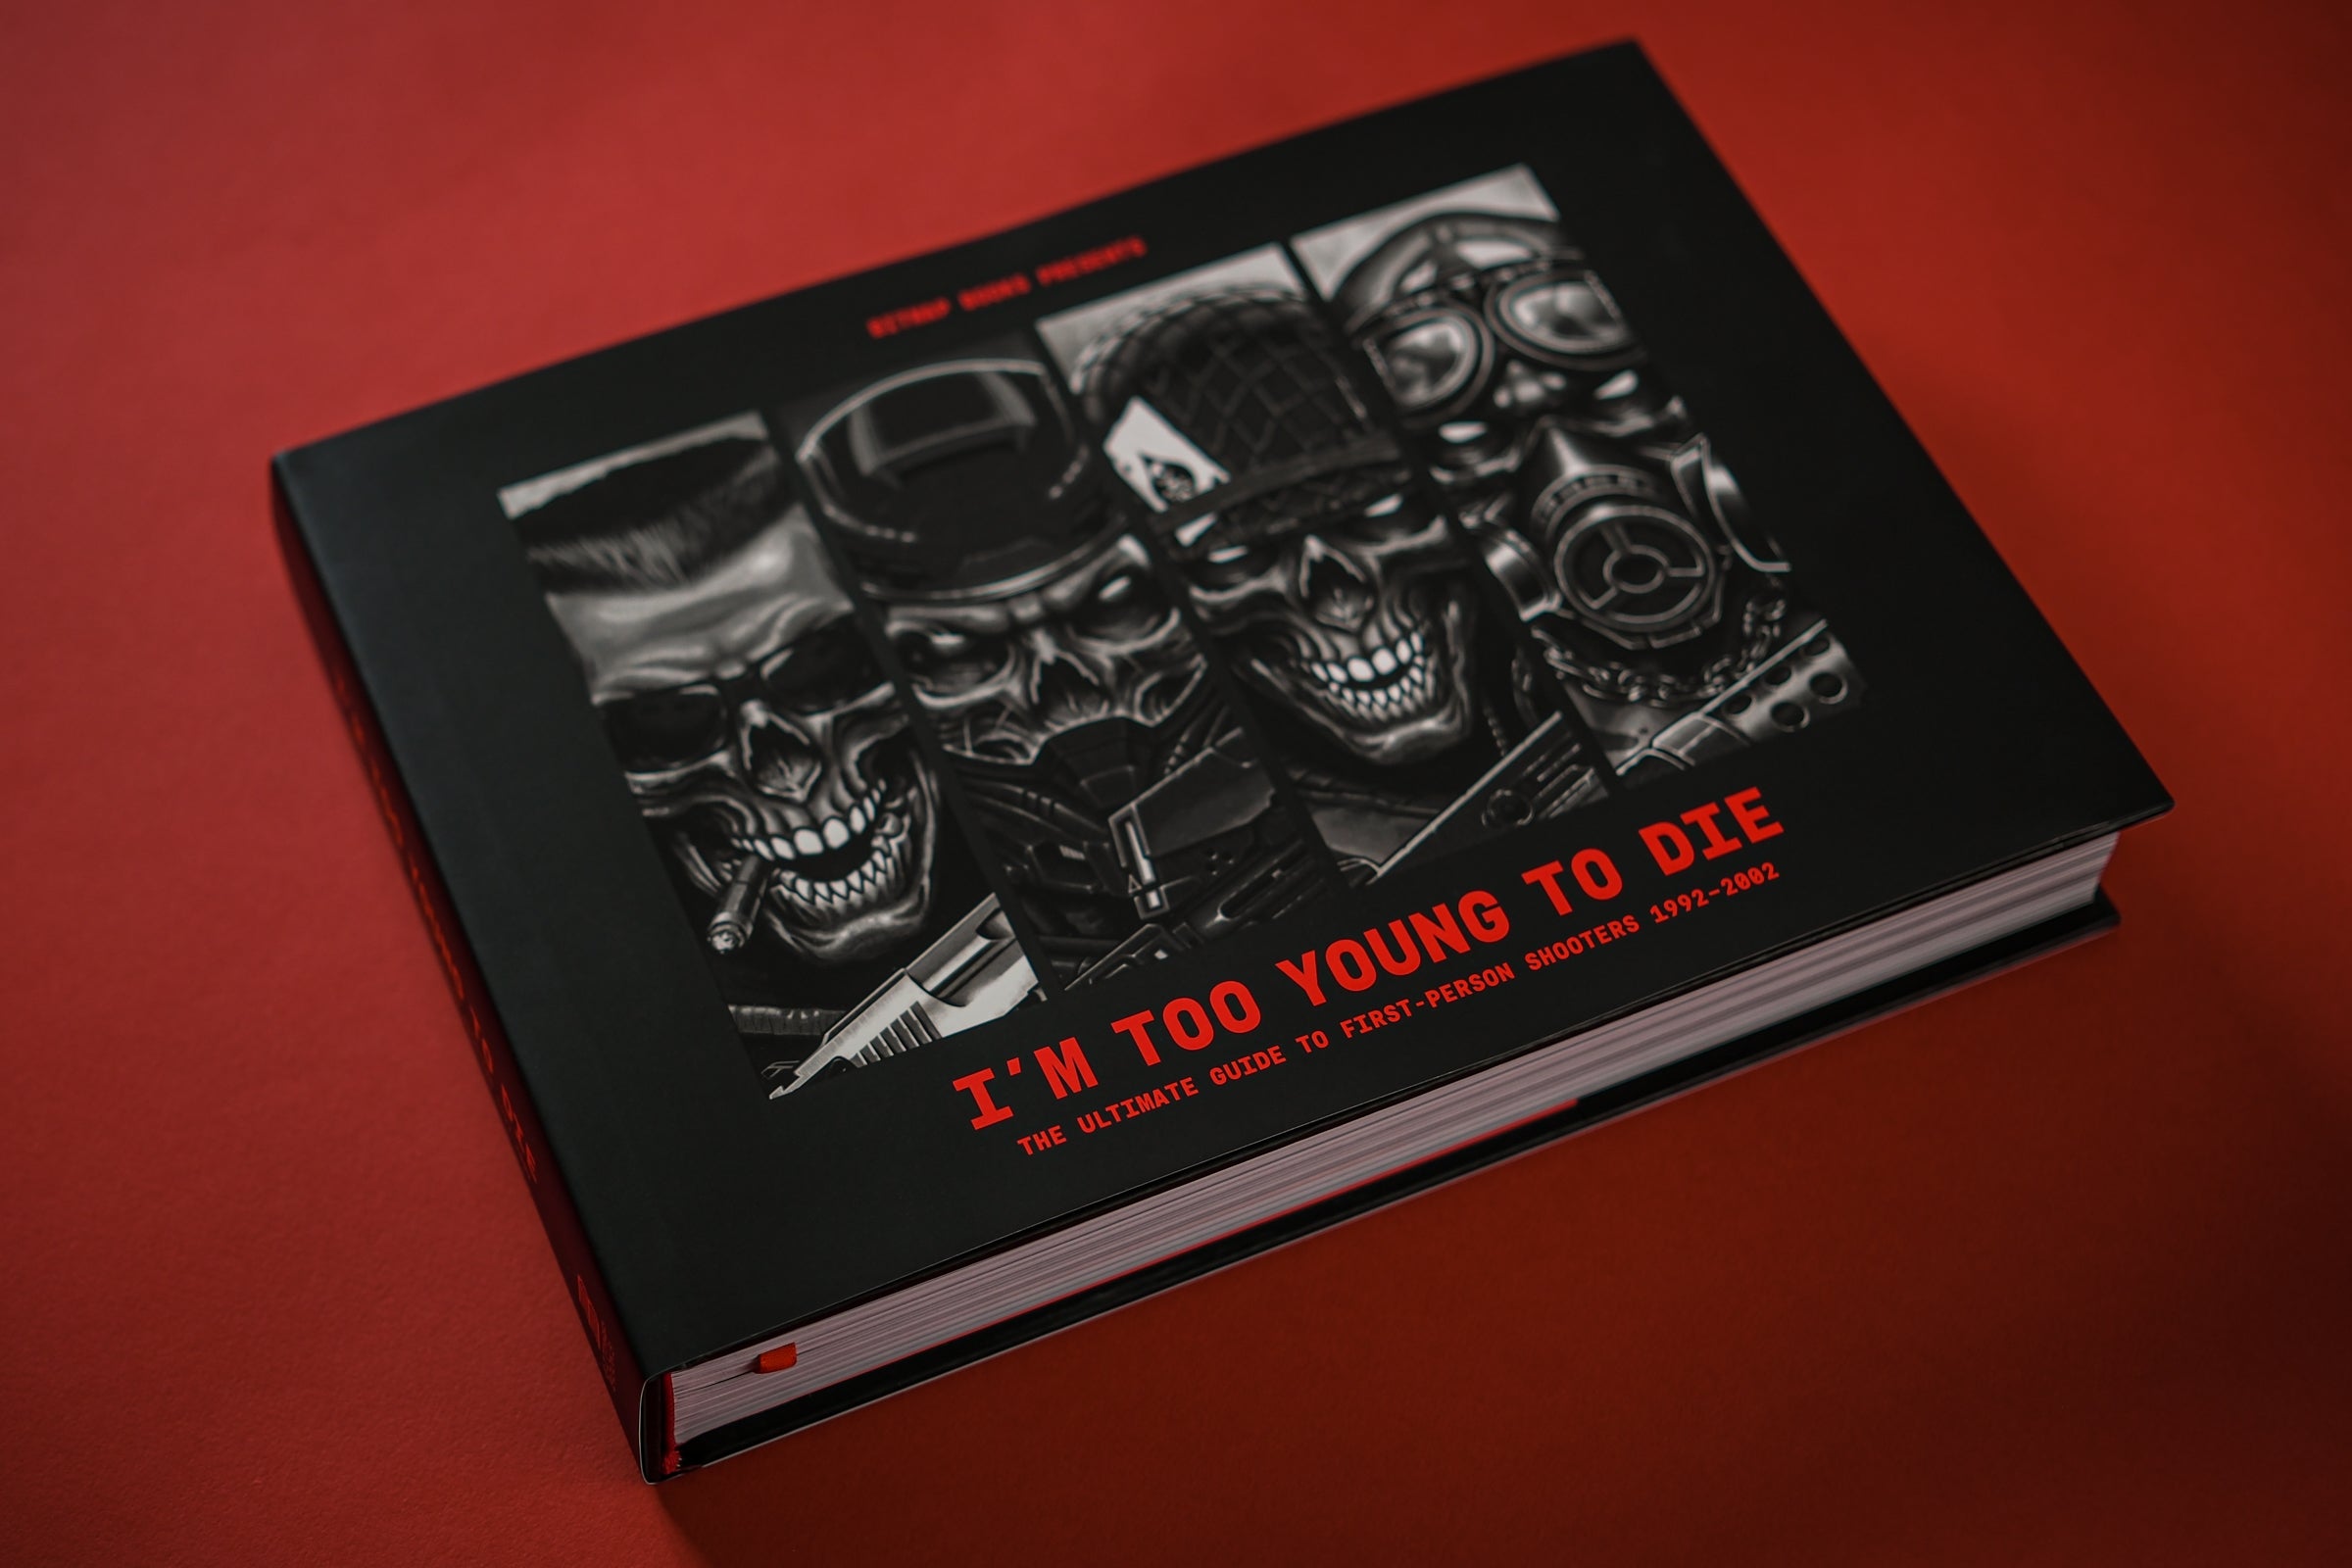 I’m Too Young To Die: The Ultimate Guide to First-Person Shooters 1992–2002